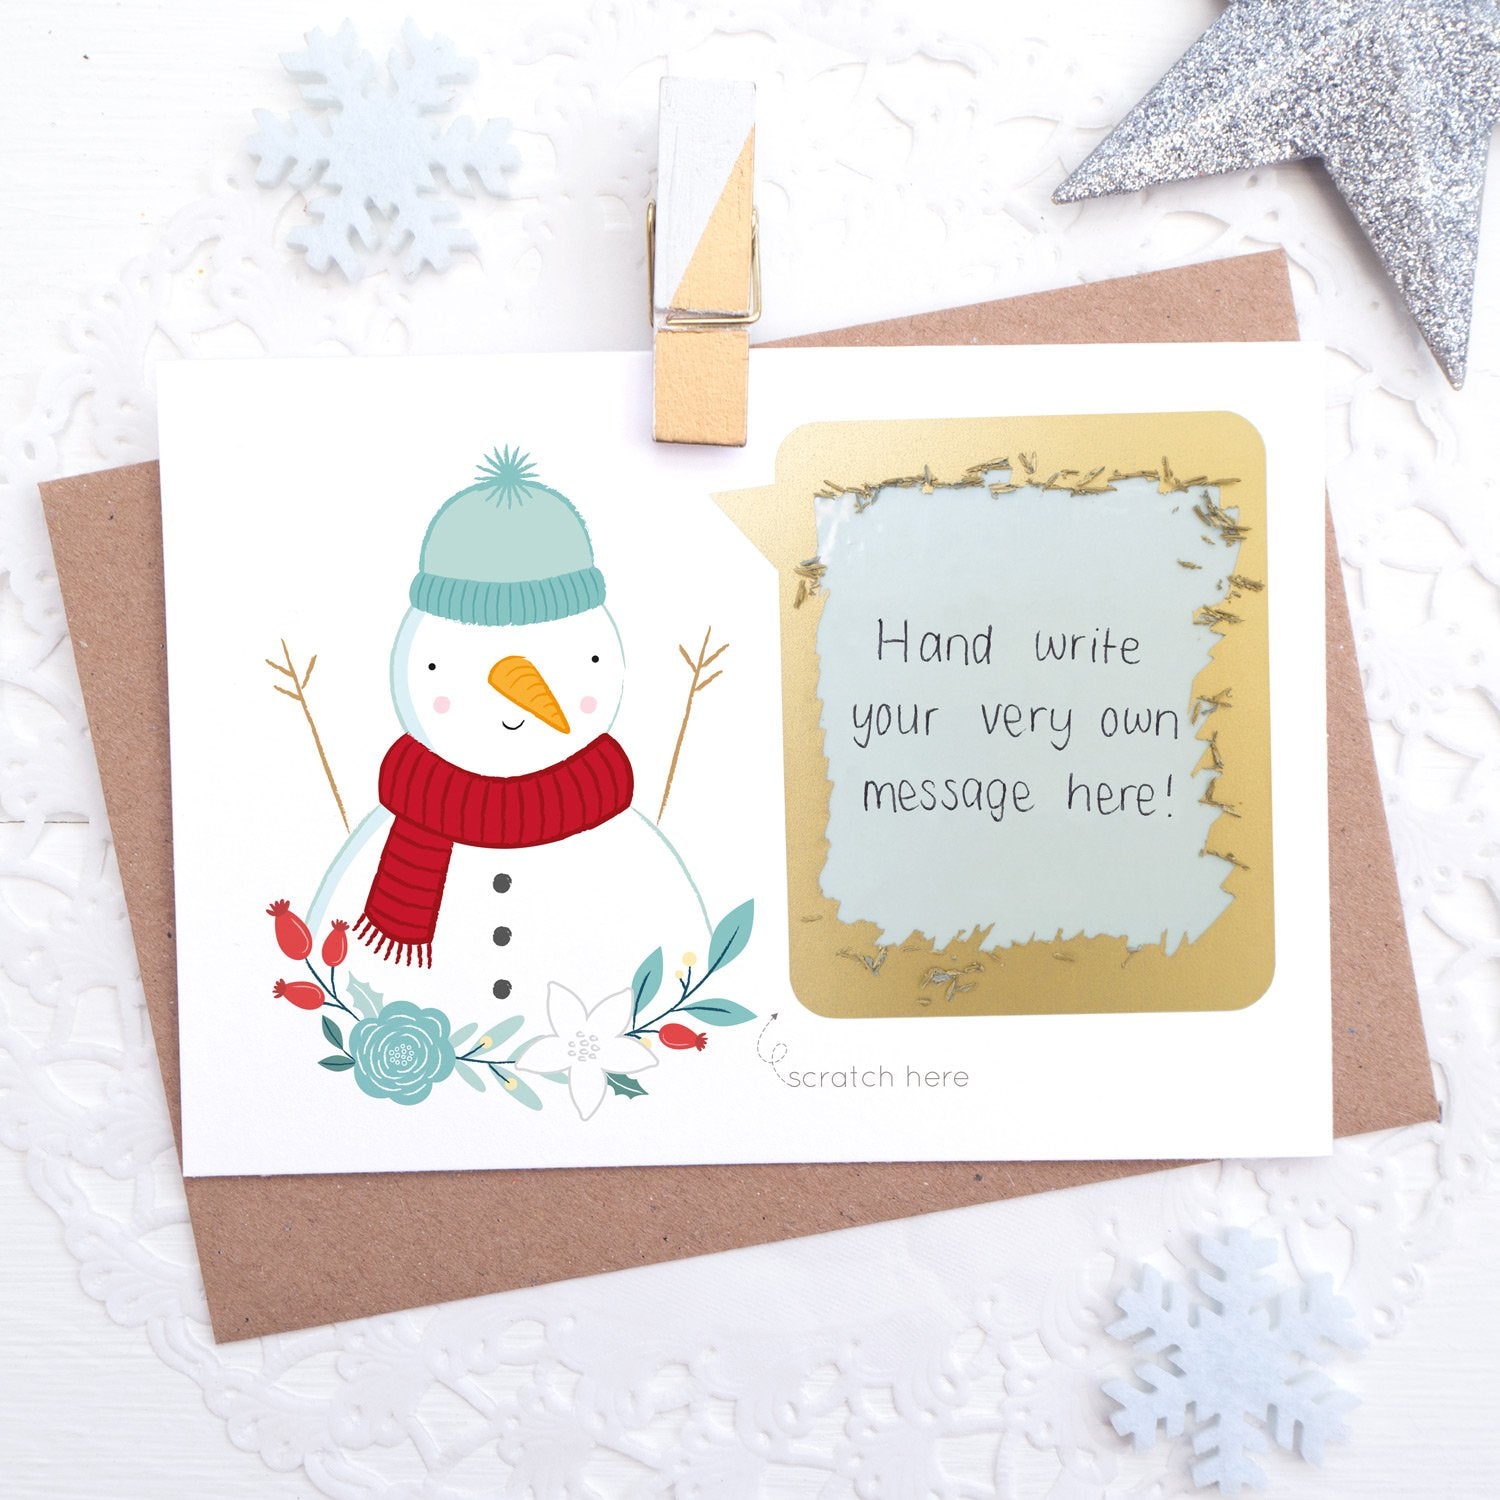 Create your very own personalised Christmas scratch card! Simply write your message under the scratch panel and watch them scratch off and reveal their gift! 